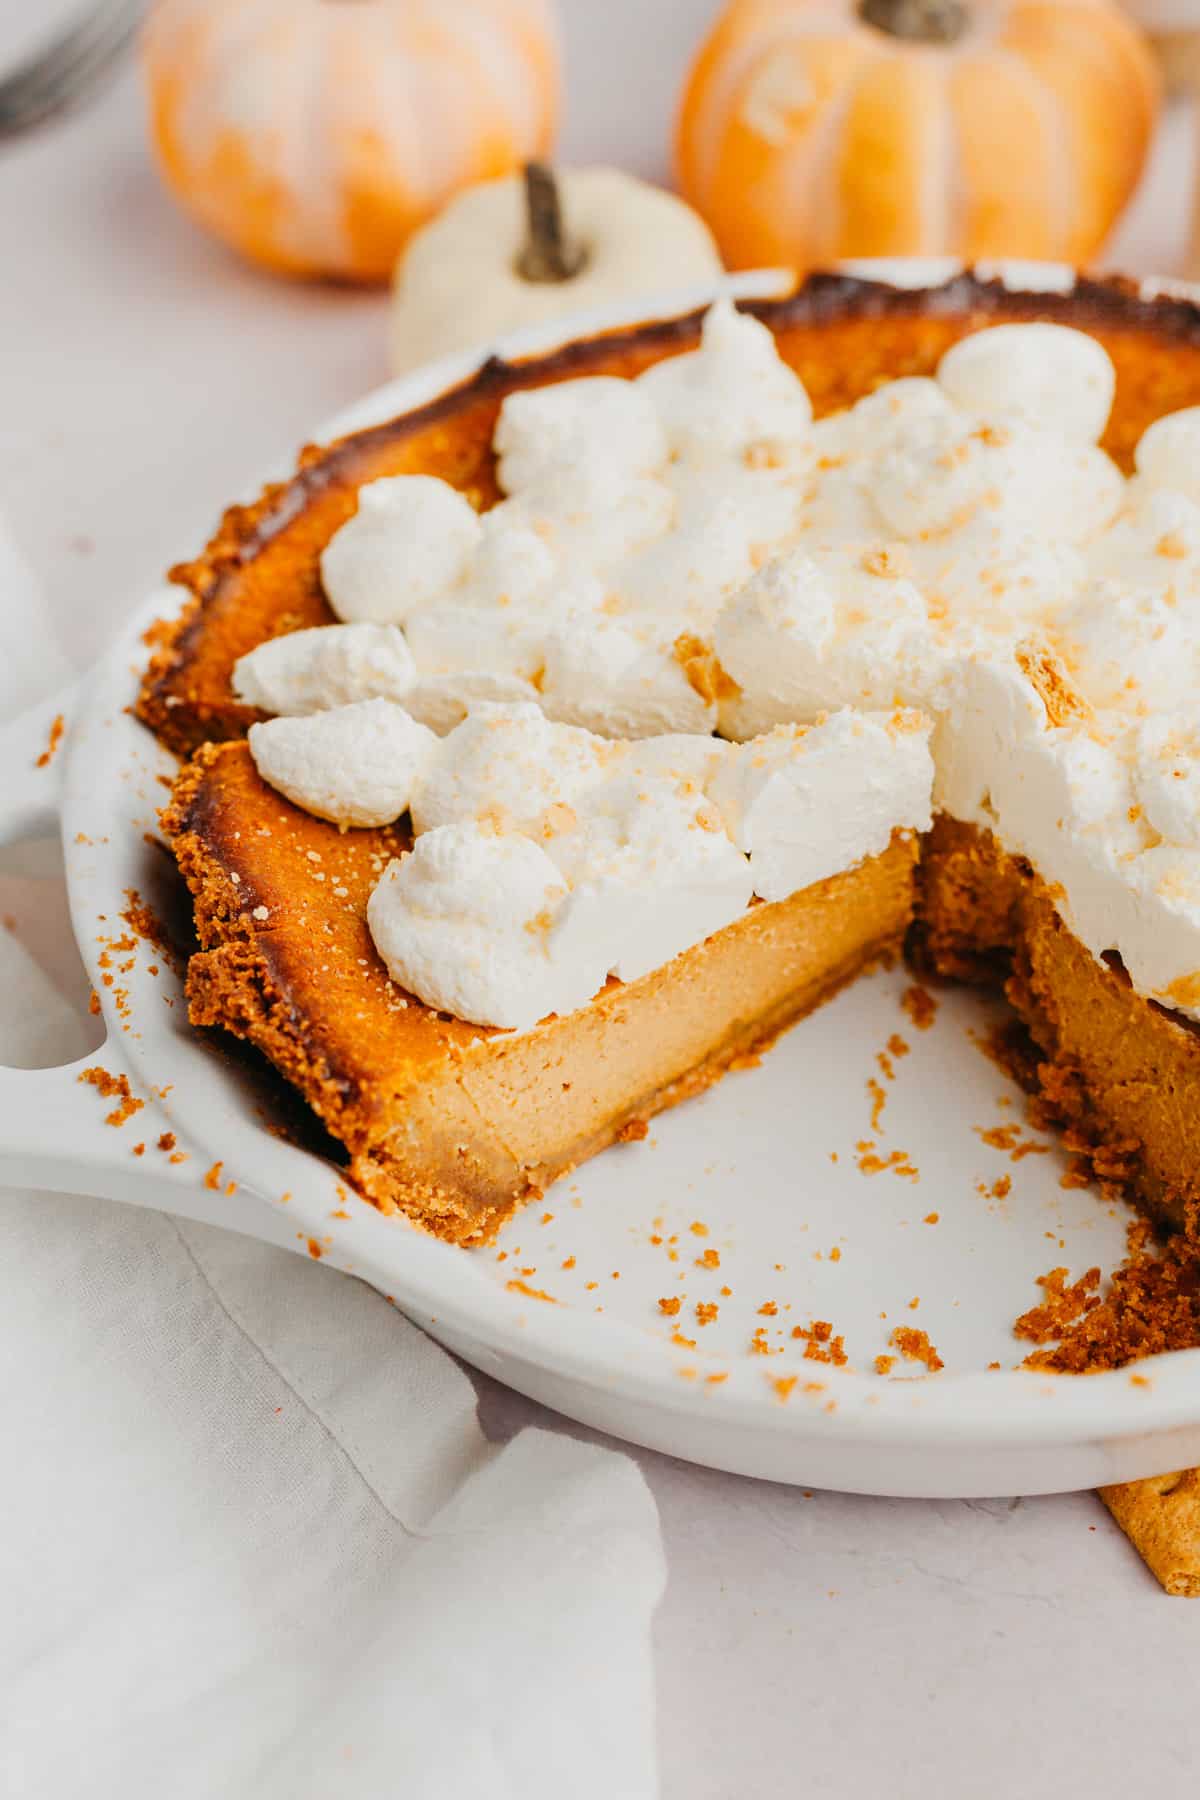 A pumpkin pie with graham cracker crust and topped with whipped cream.